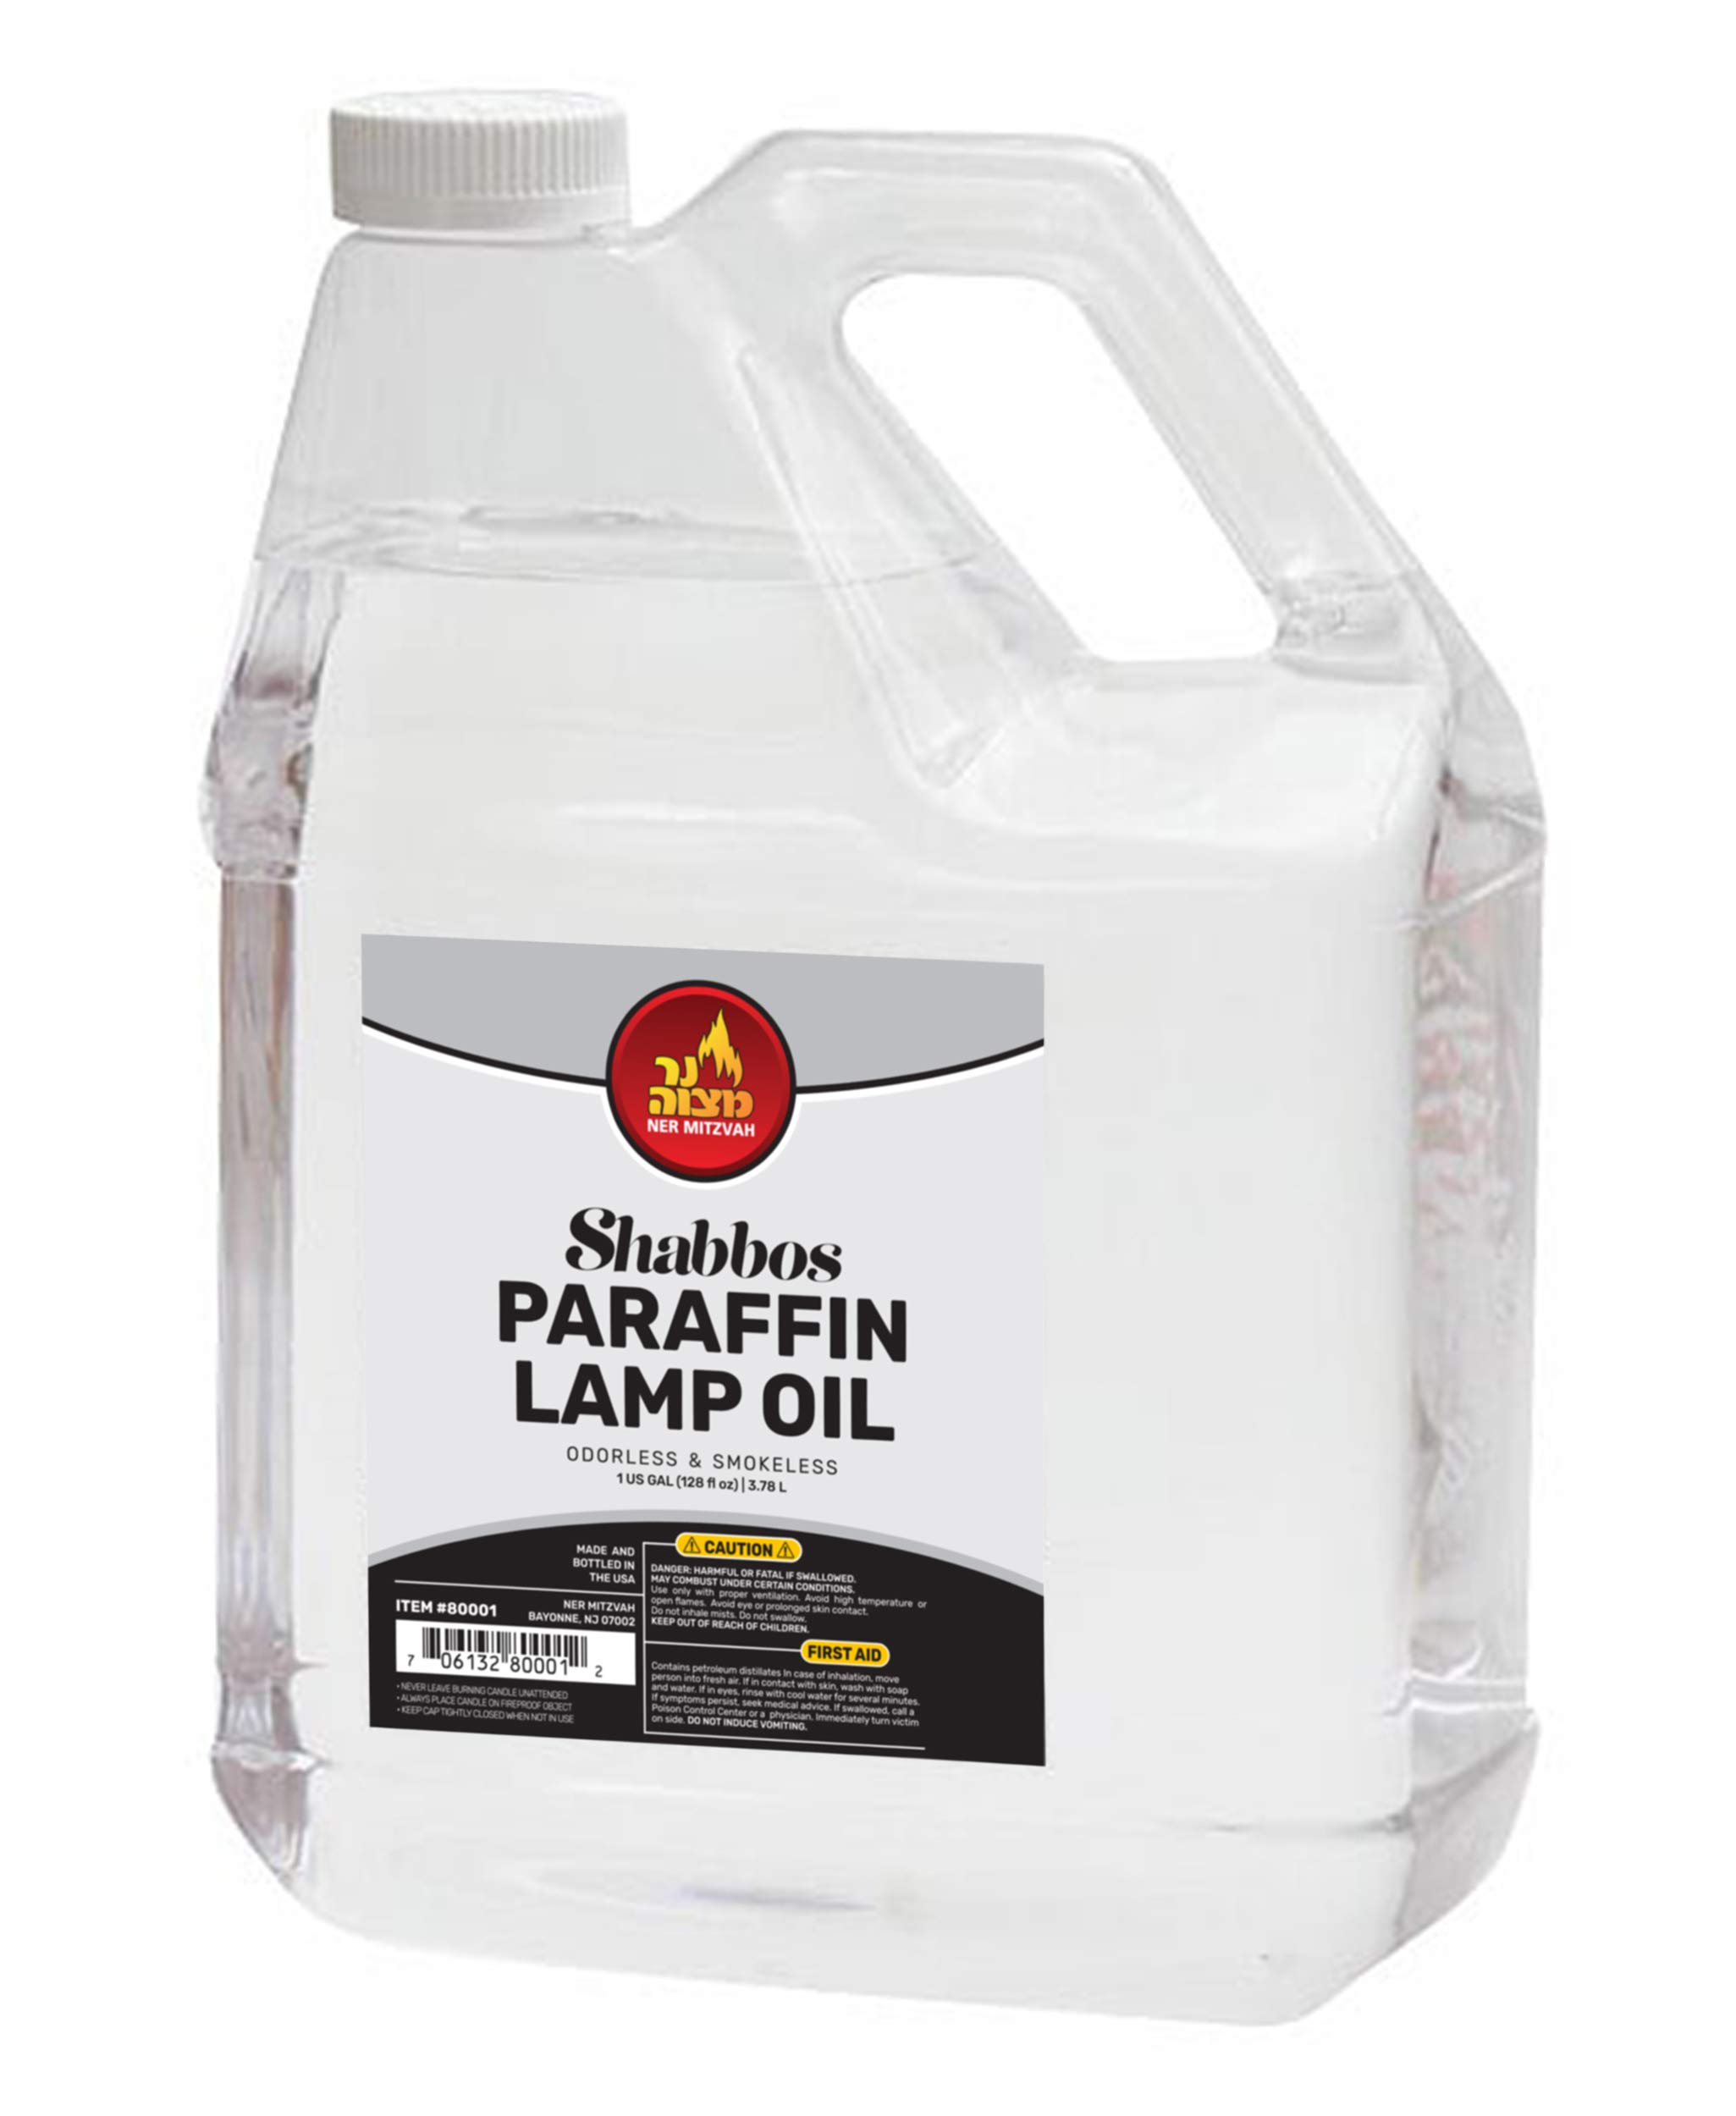 Ner Mitzvah 80001 1 Gallon Paraffin Lamp Oil - Clear Smokeless, Odorless,  Clean Burning Fuel for Indoor and Outdoor Use - Shabbos Lamp Oil, by Ner